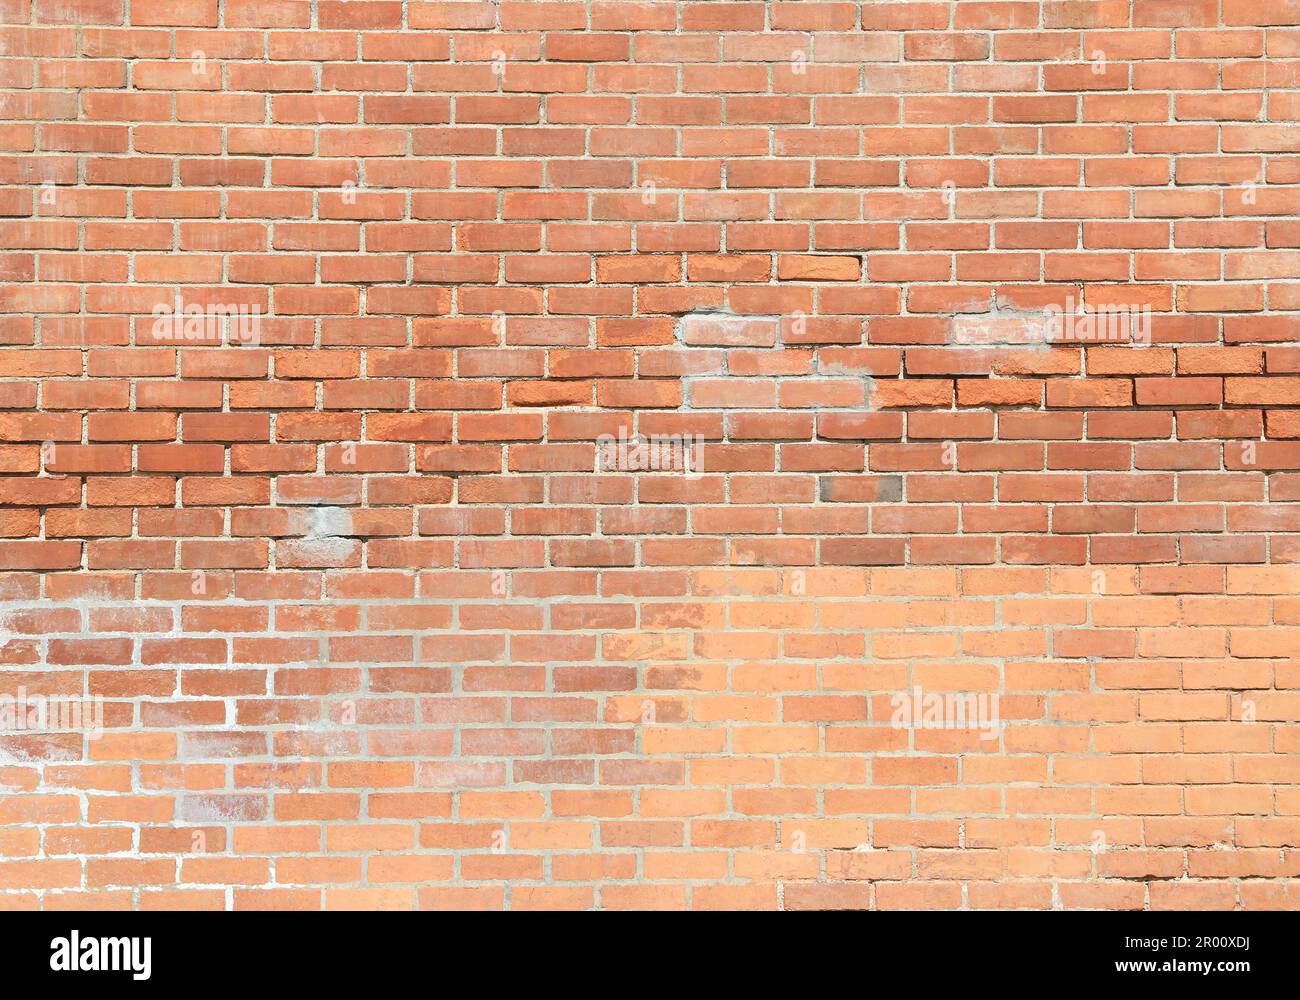 Red grunge bricks wall texture or background. Stock Photo